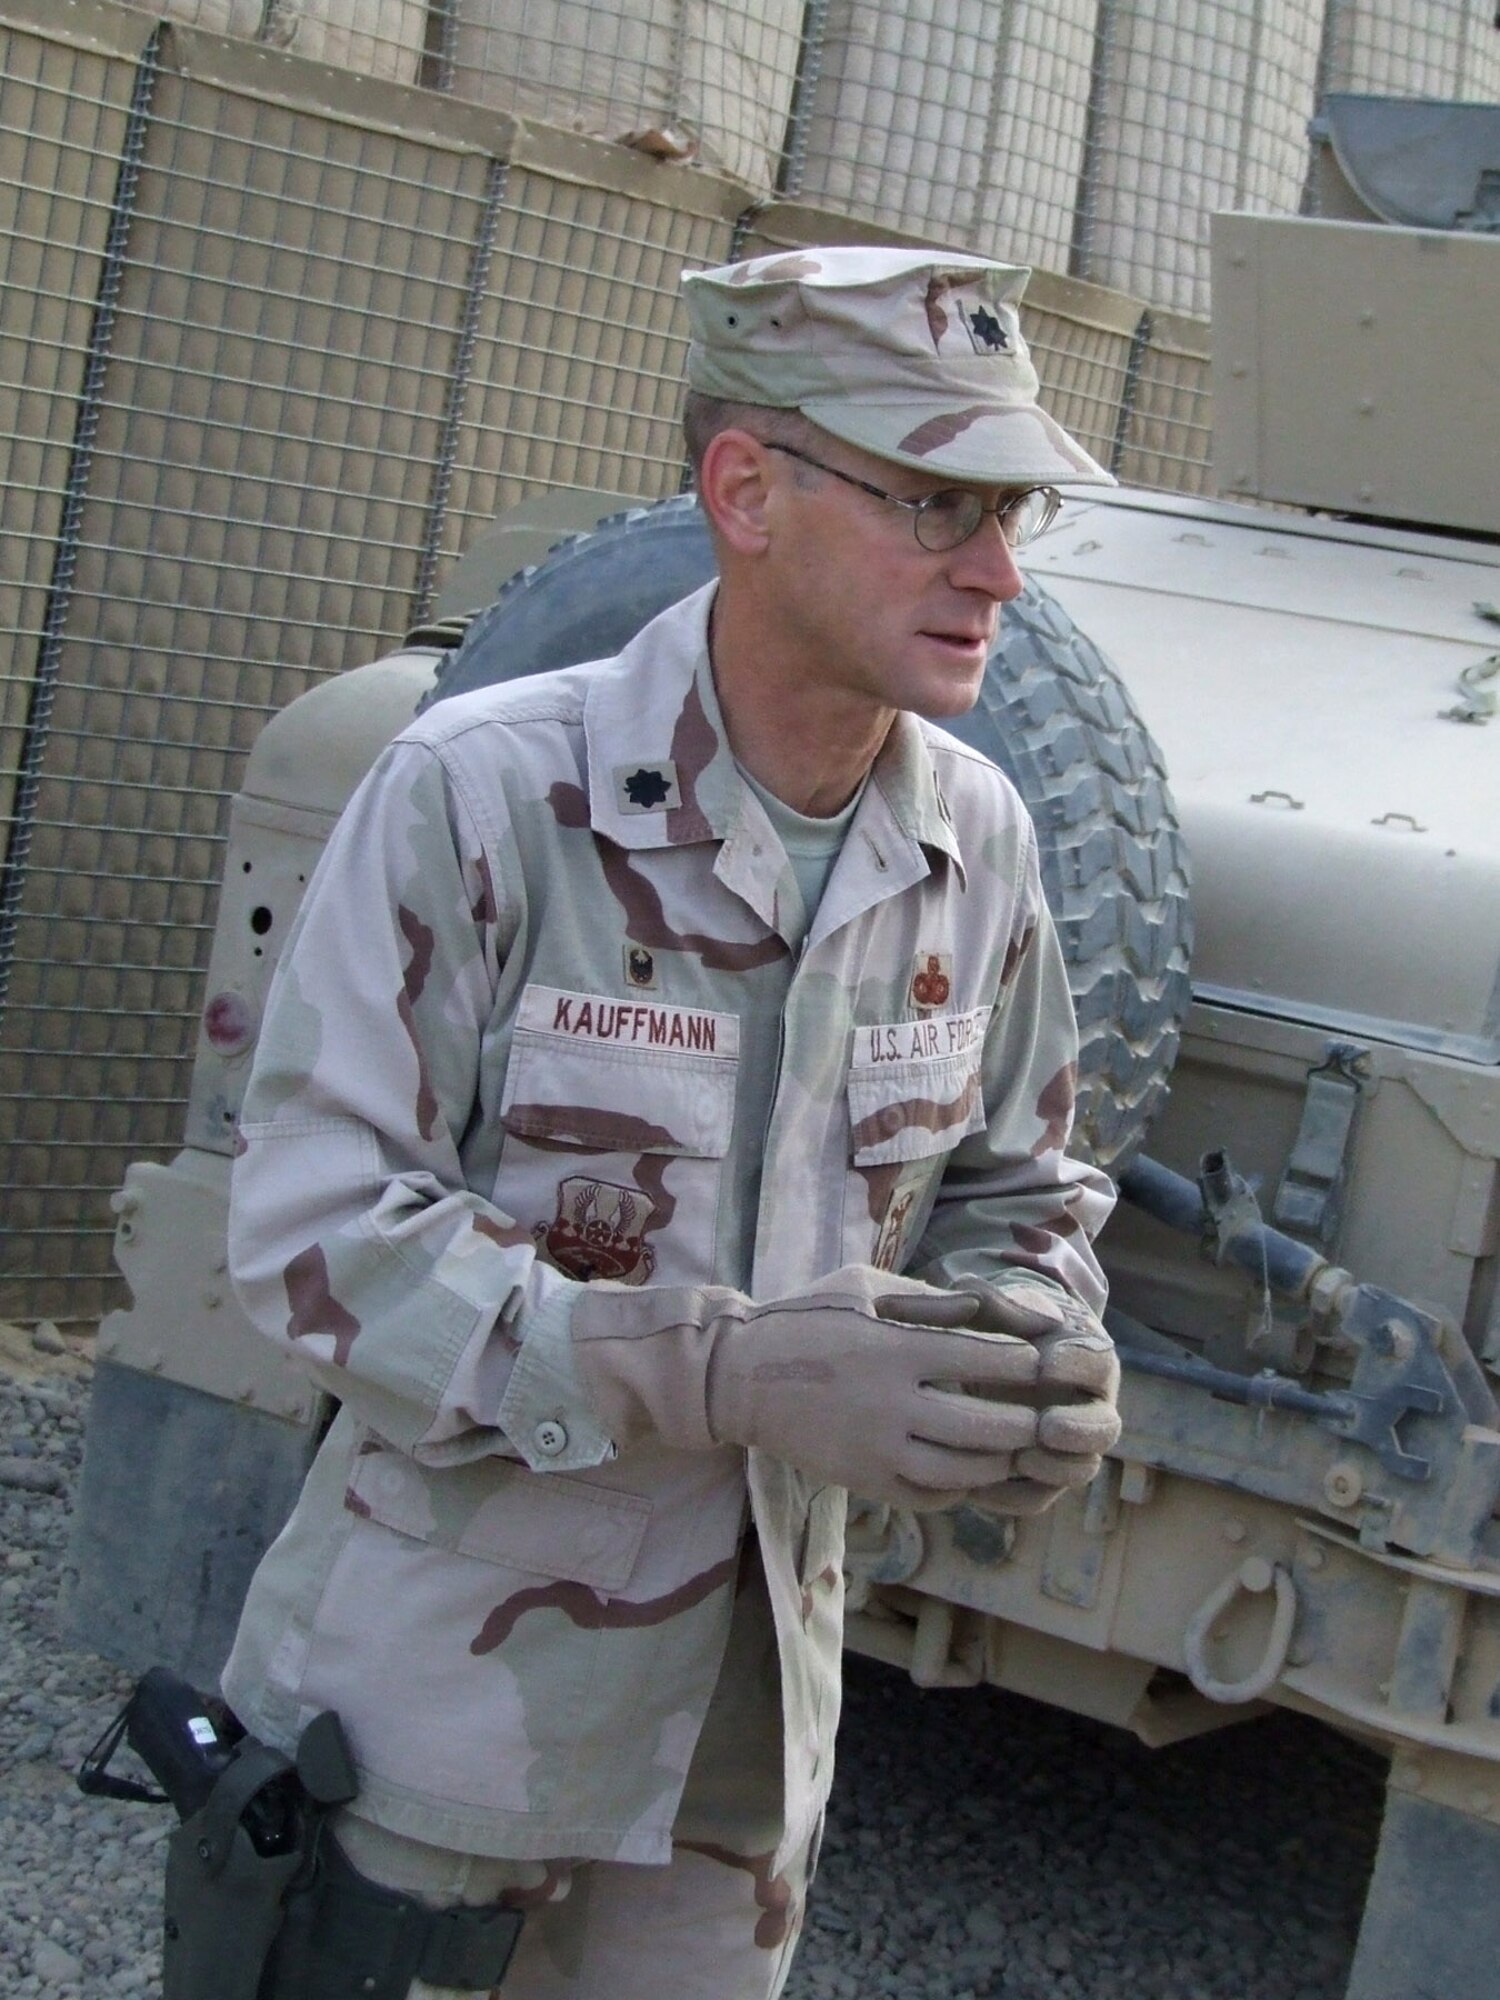 Lt. Col. Steve Kauffmann prepares to depart on a convoy from Contingency Operating Base Speicher, Iraq. Deployed from the Pentagon, Colonel Kauffmann is the commander of the 732nd Expeditionary Security Forces Squadron's Detachment 6 at COB Speicher. Detachment Airmen send convoys out daily to assess the capability of Iraqi police stations in the Salah ad Din province. (U.S. Air Force photo/Maj. Richard C. Sater)